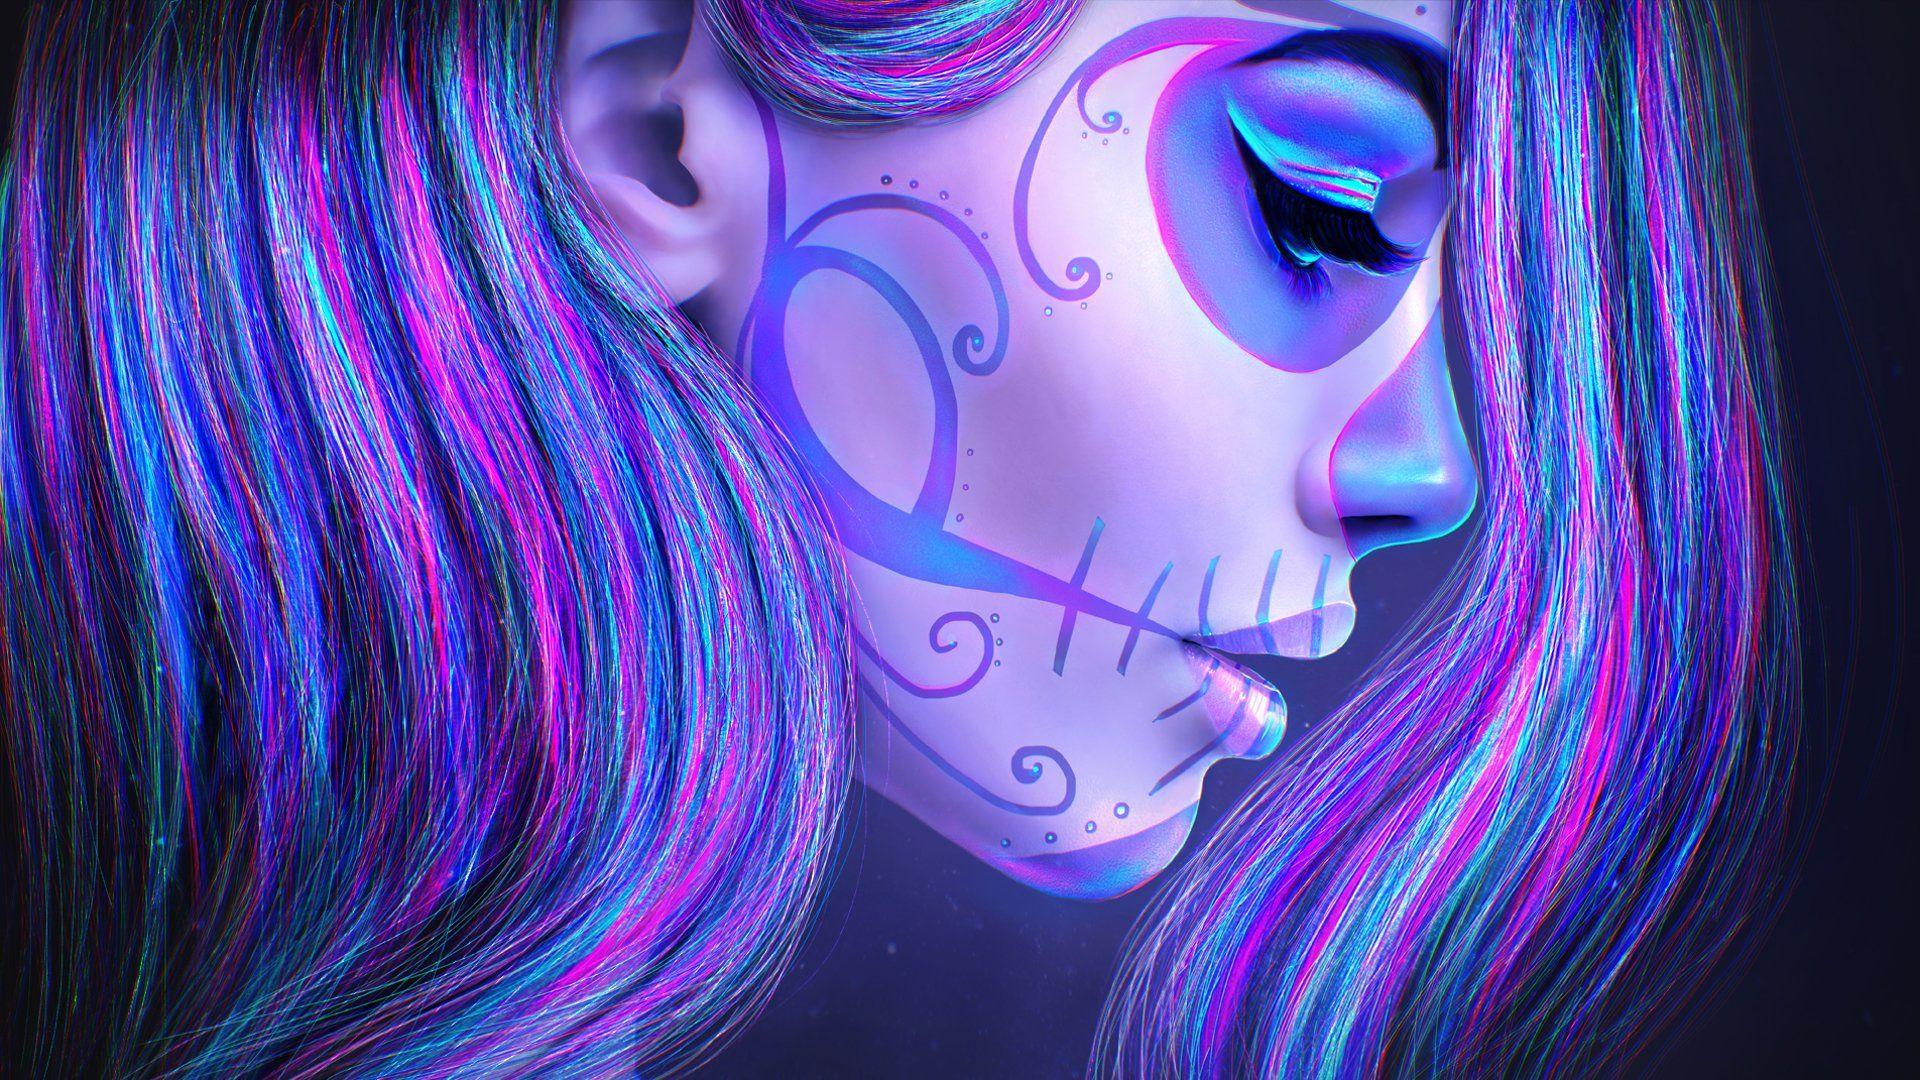 Sugar Skull Full HD Wallpapers and Backgrounds Image.